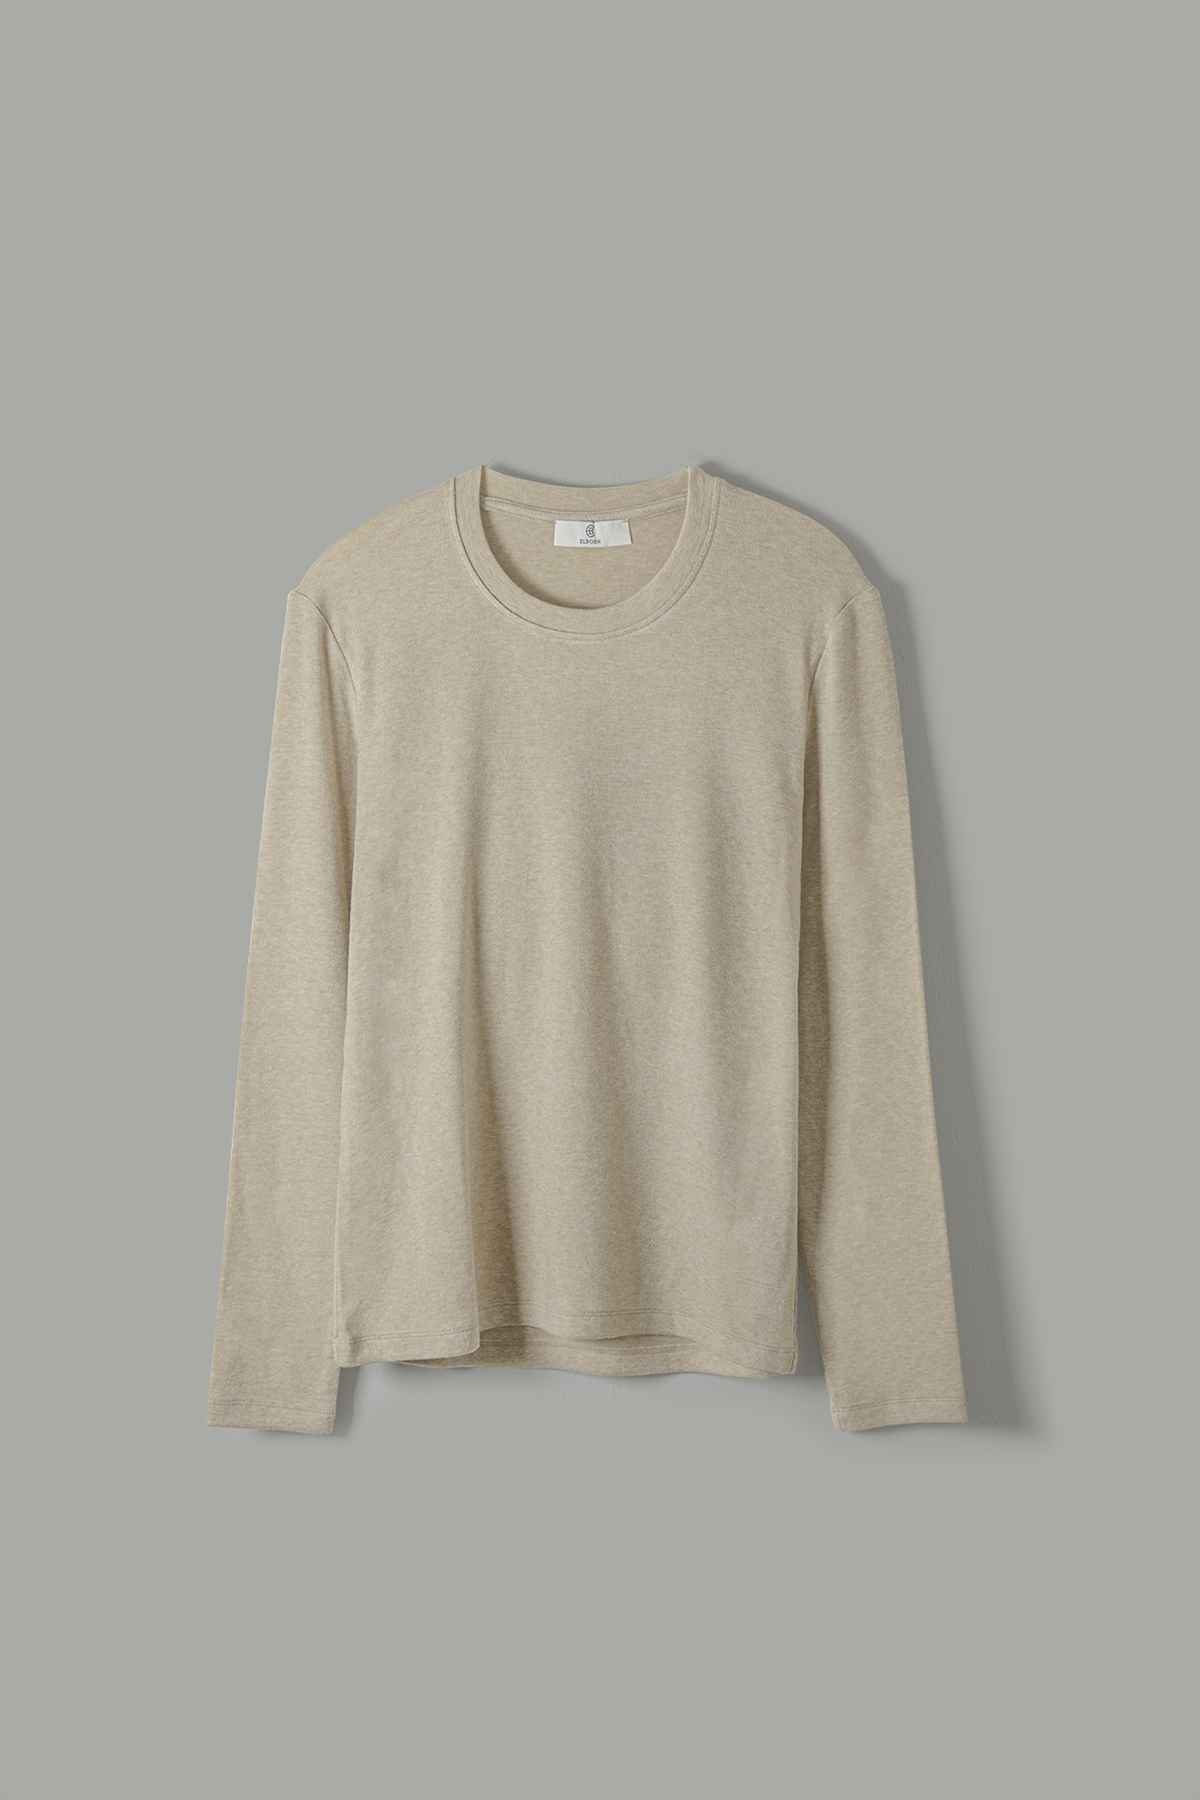 Wool Blended Jersey Top (4 colors)